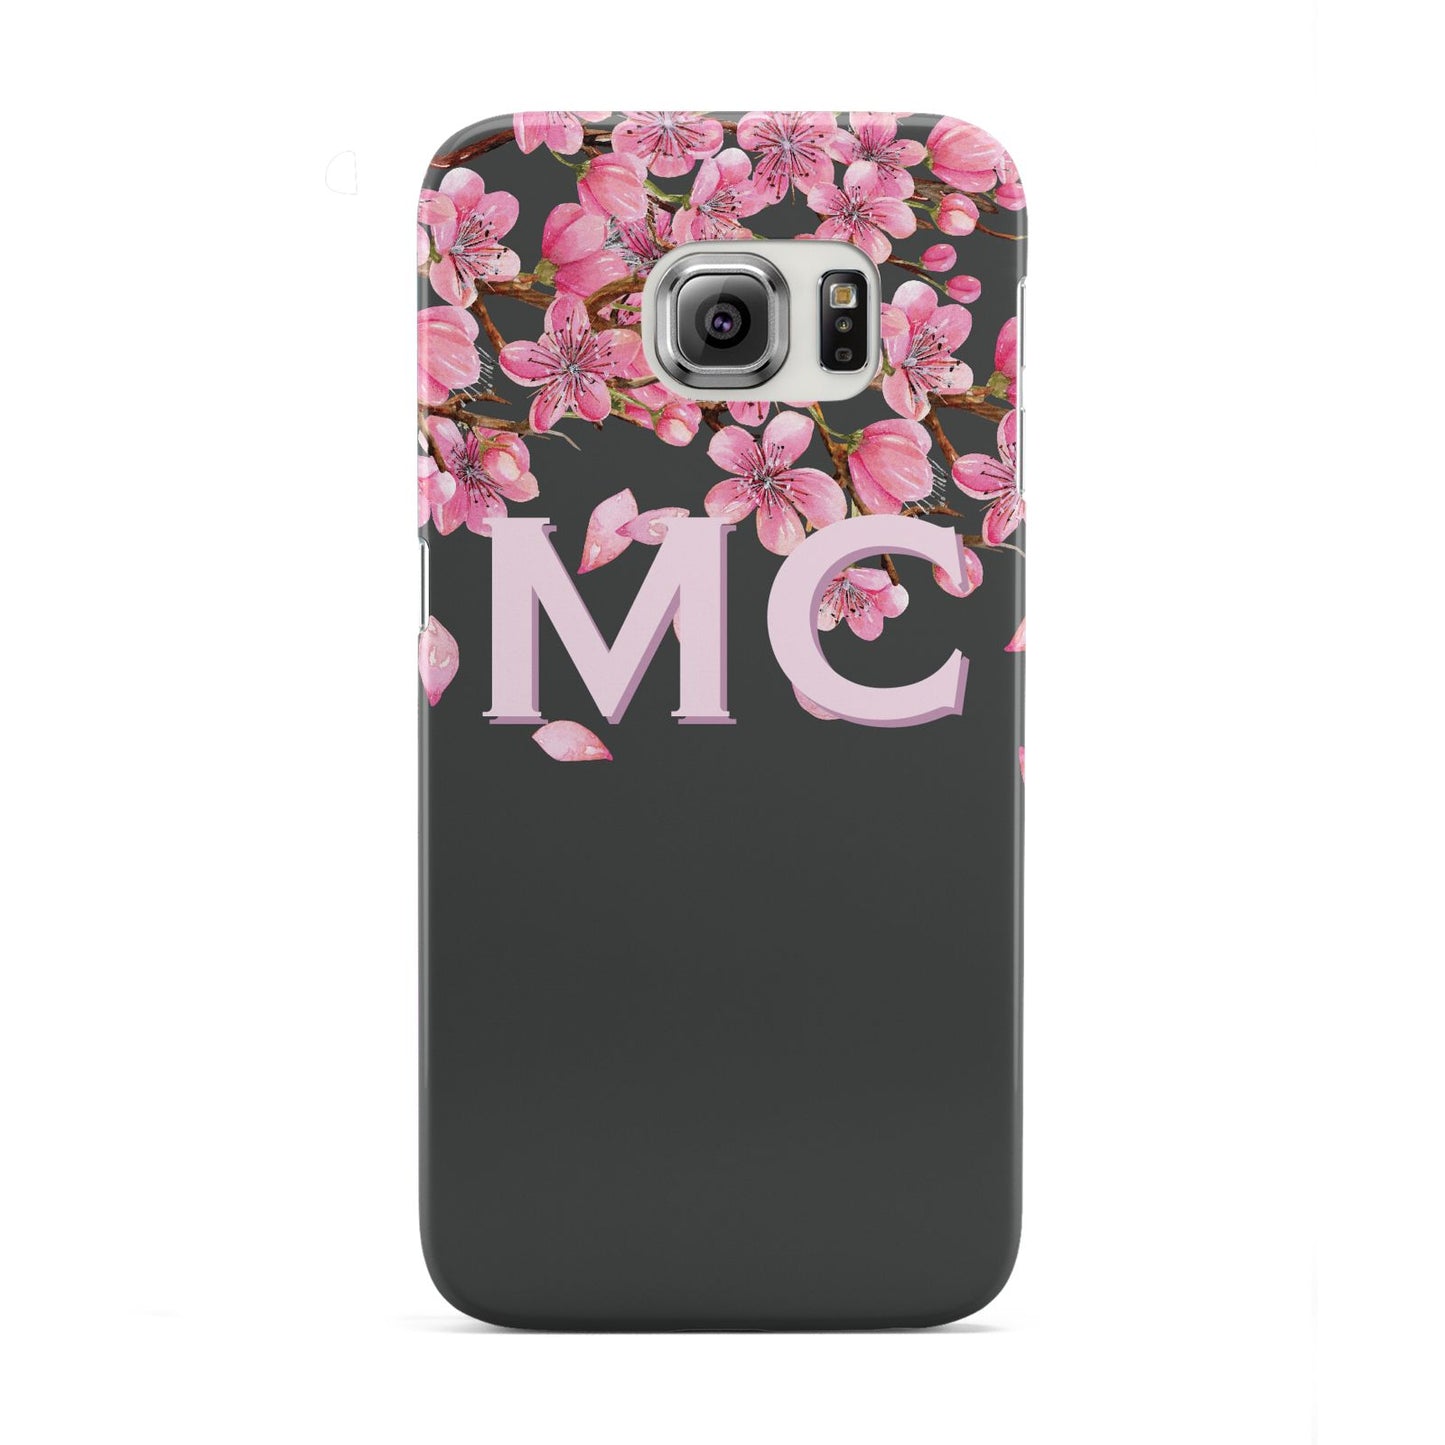 Personalised Floral Blossom Black Pink Samsung Galaxy S6 Edge Case